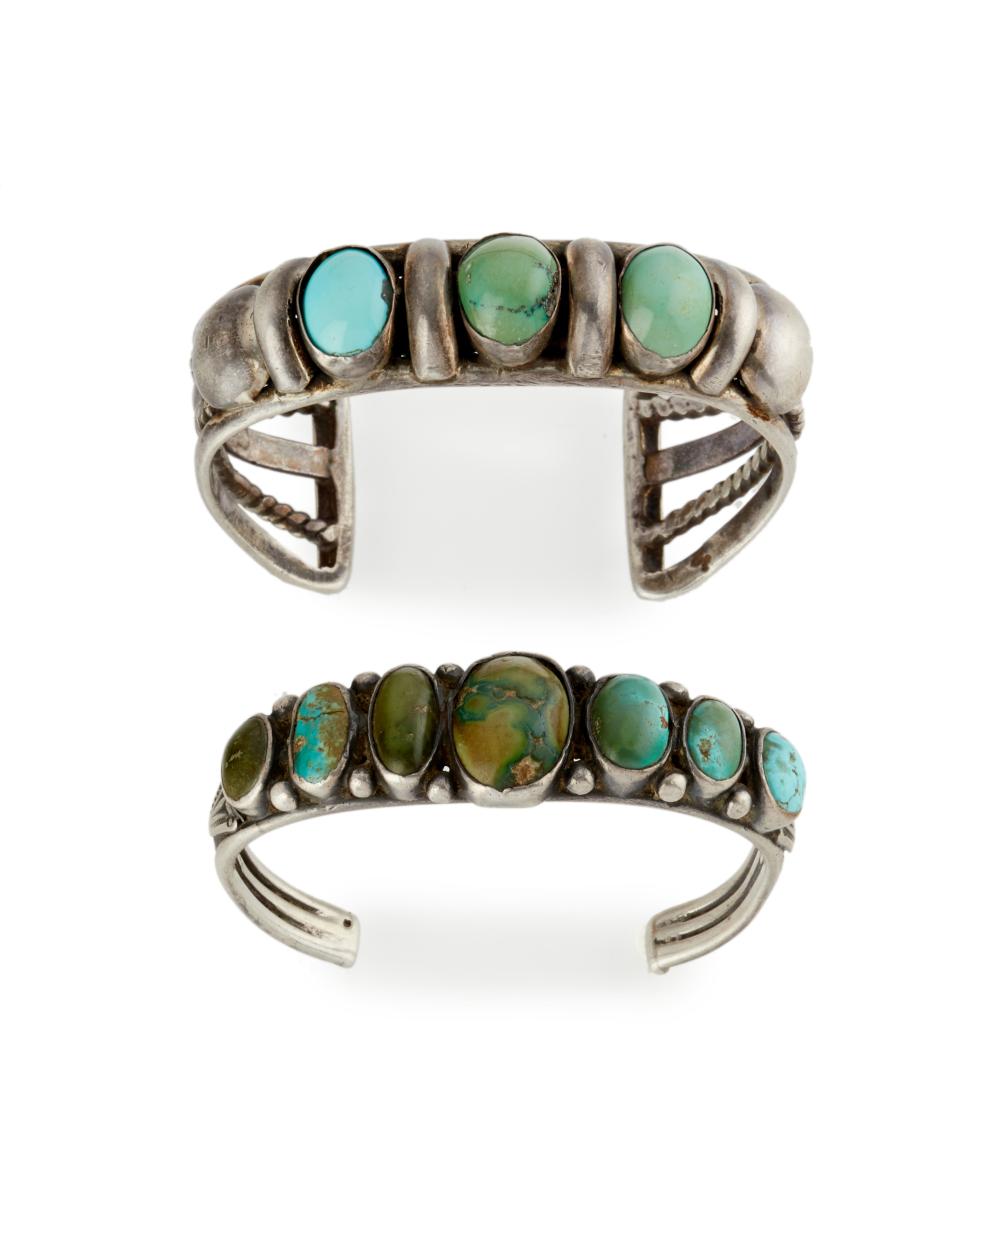 TWO SILVER AND TURQUOISE BRACELETSTwo